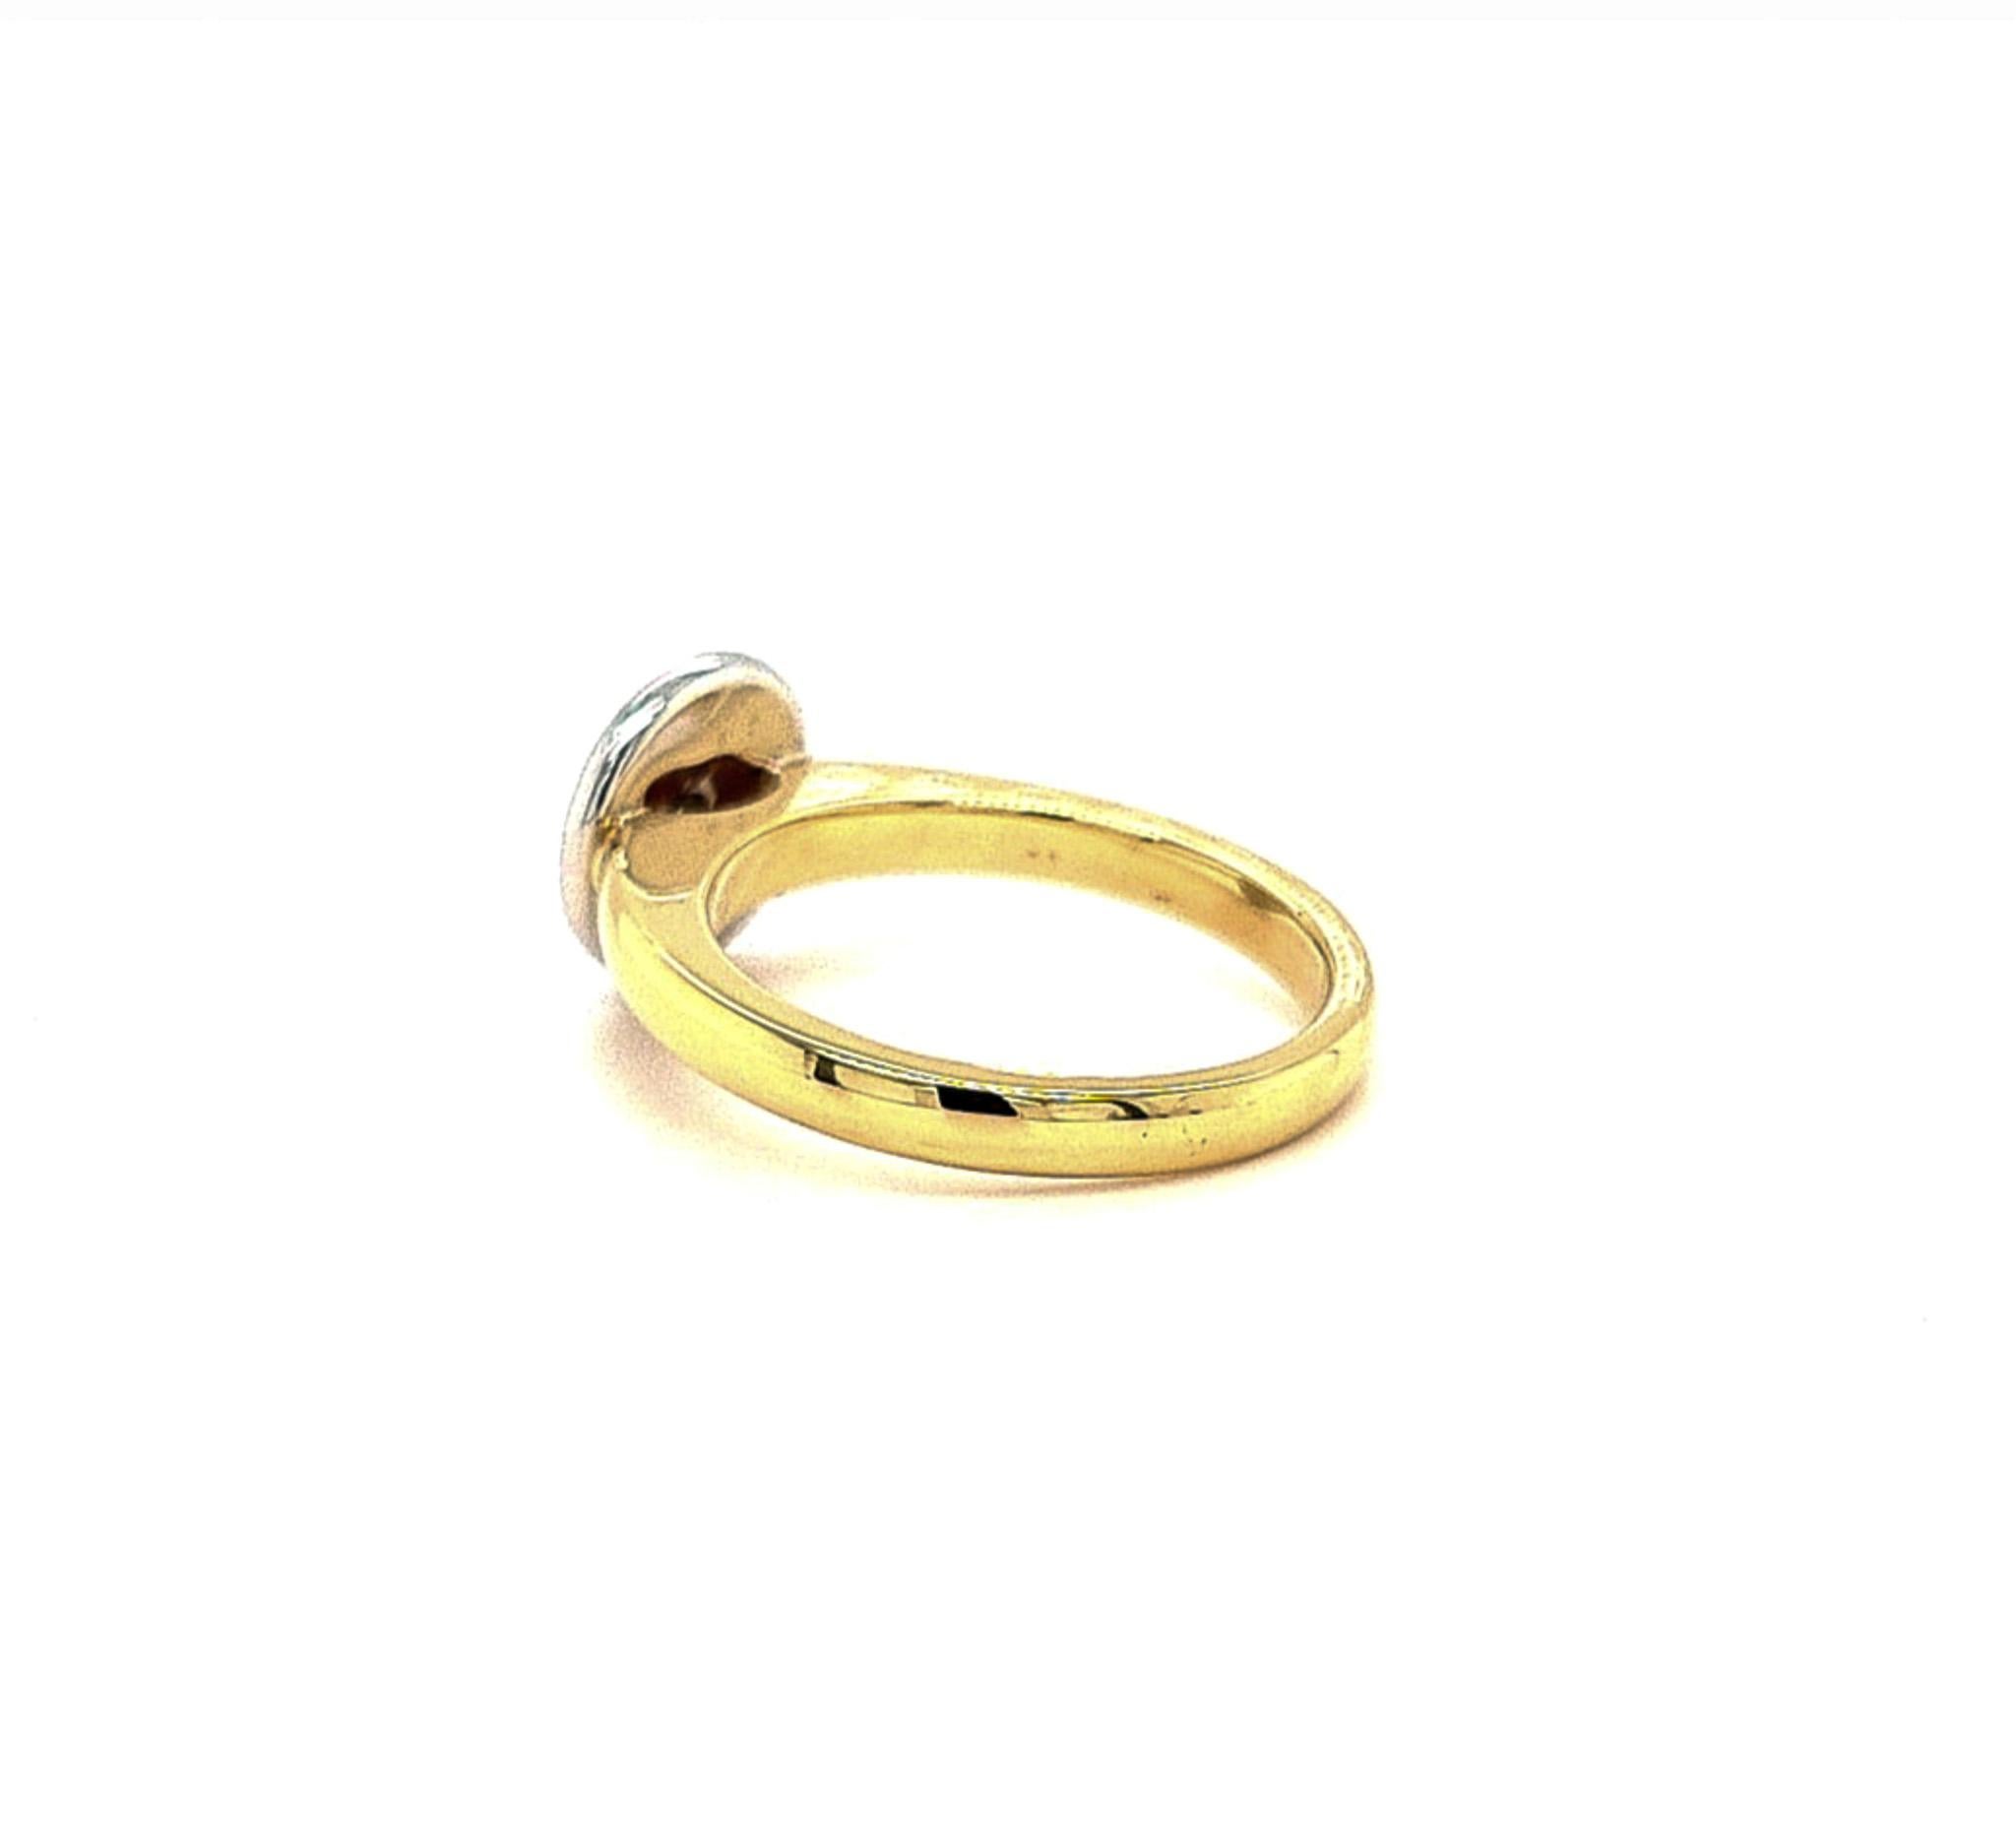 For Sale:  18ct Gold & Diamond Engagement Ring 